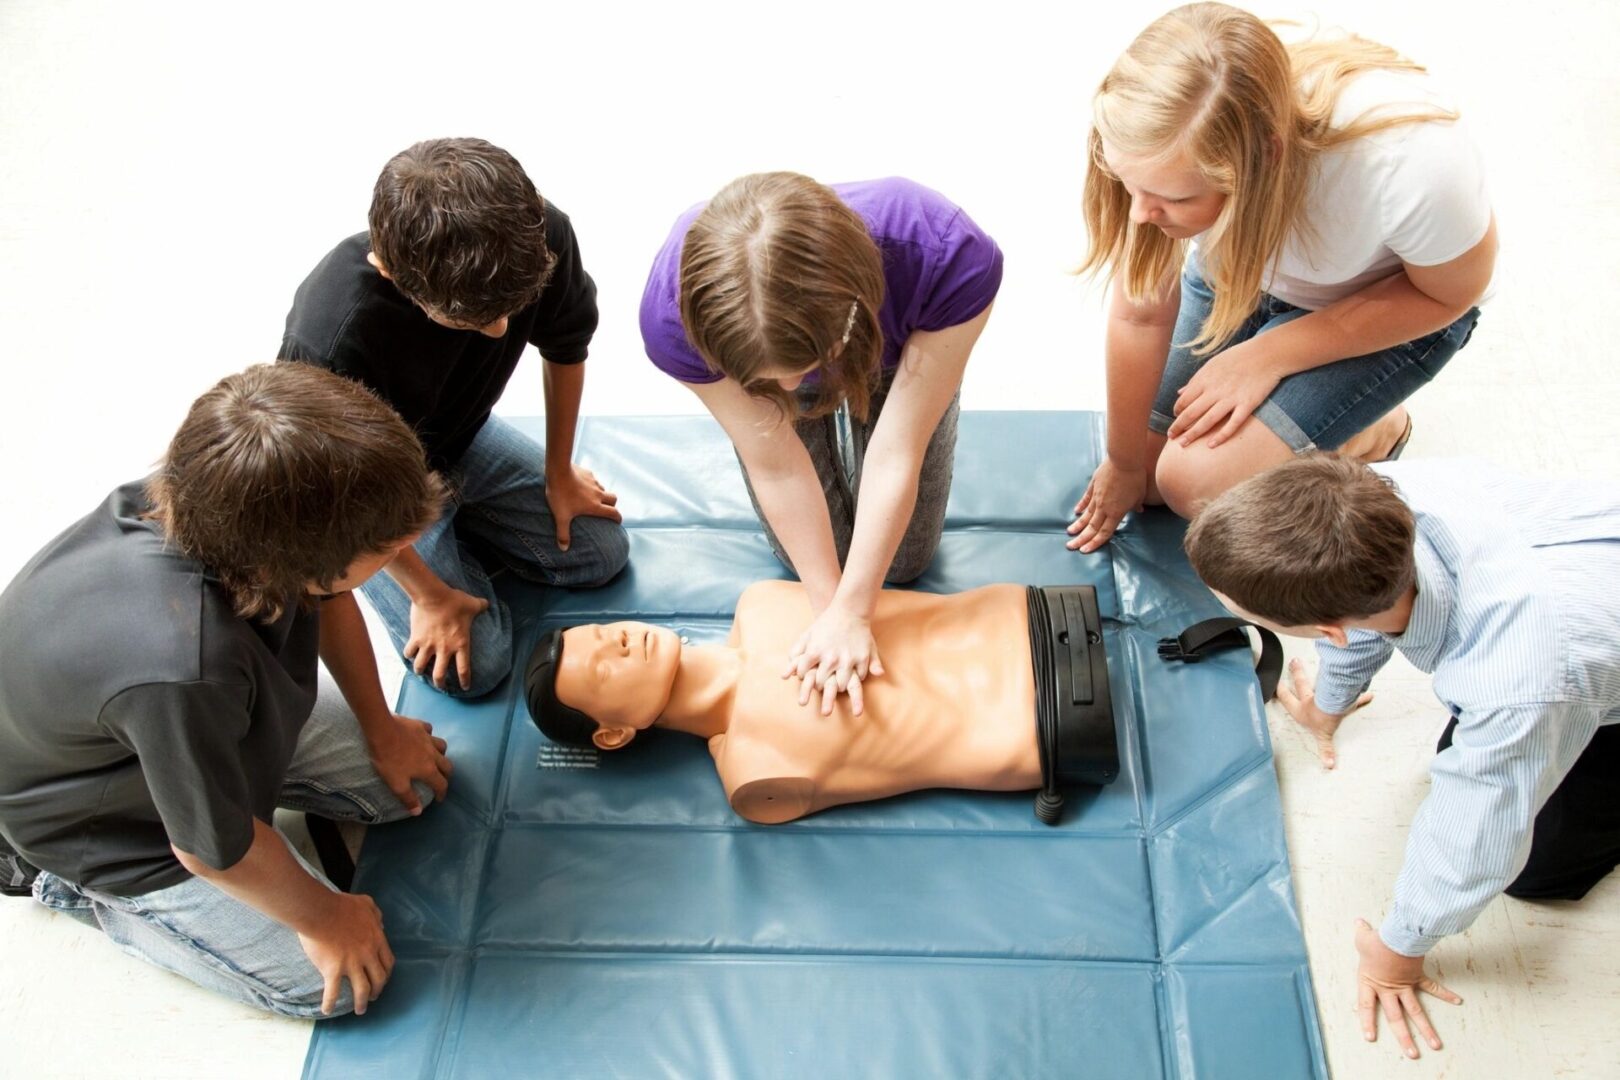 A group of people standing around an adult cpr dummy.